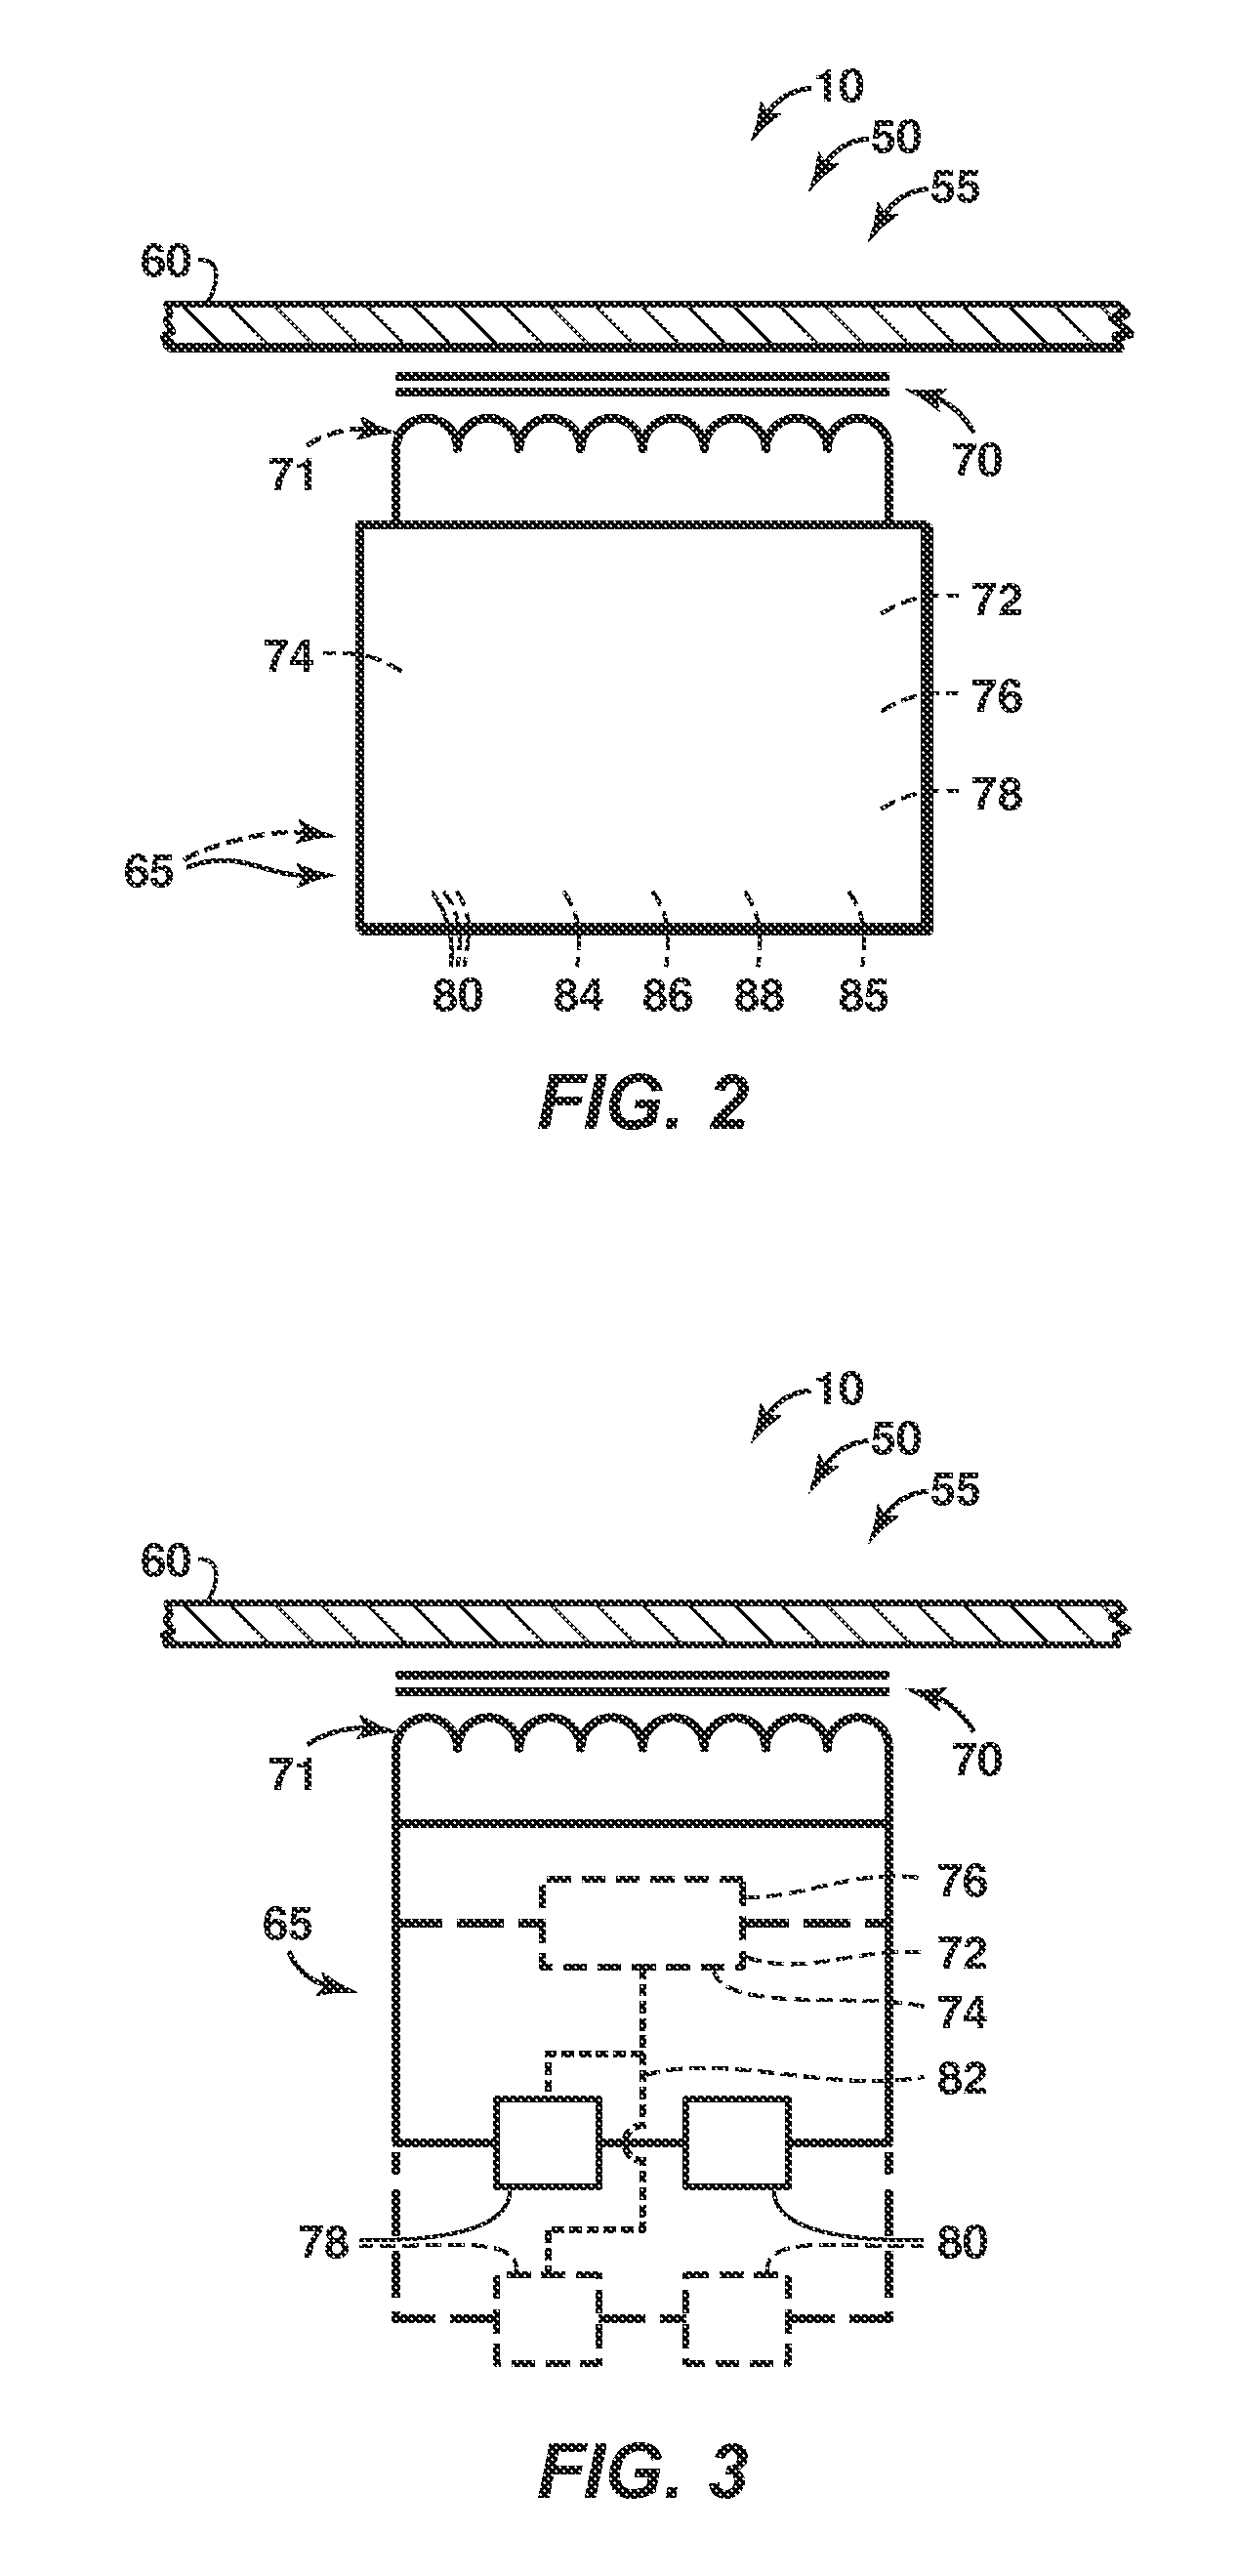 Systems and Methods For Distributed Impedance Compensation In Subsea Power Distribution